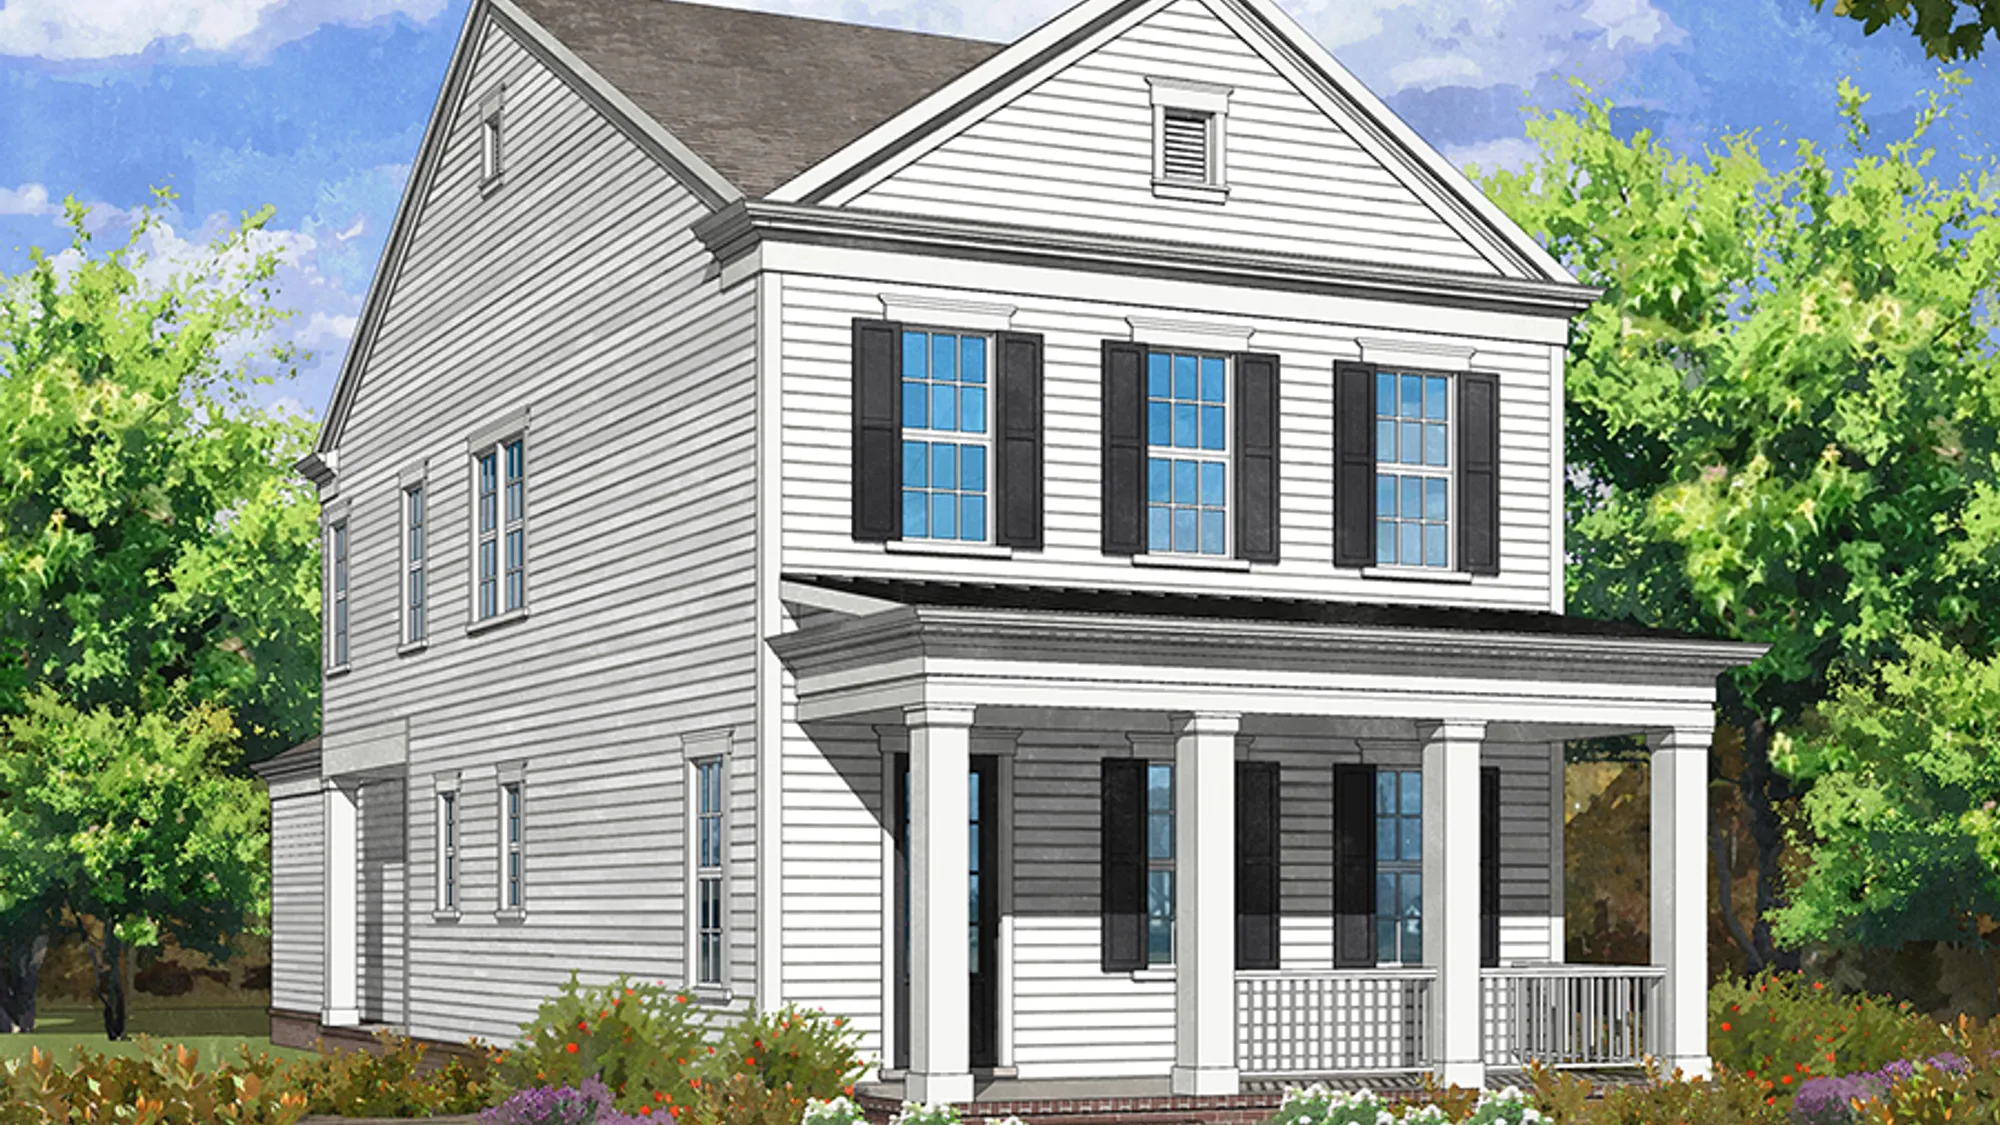 Preston color rendering of 2-story home